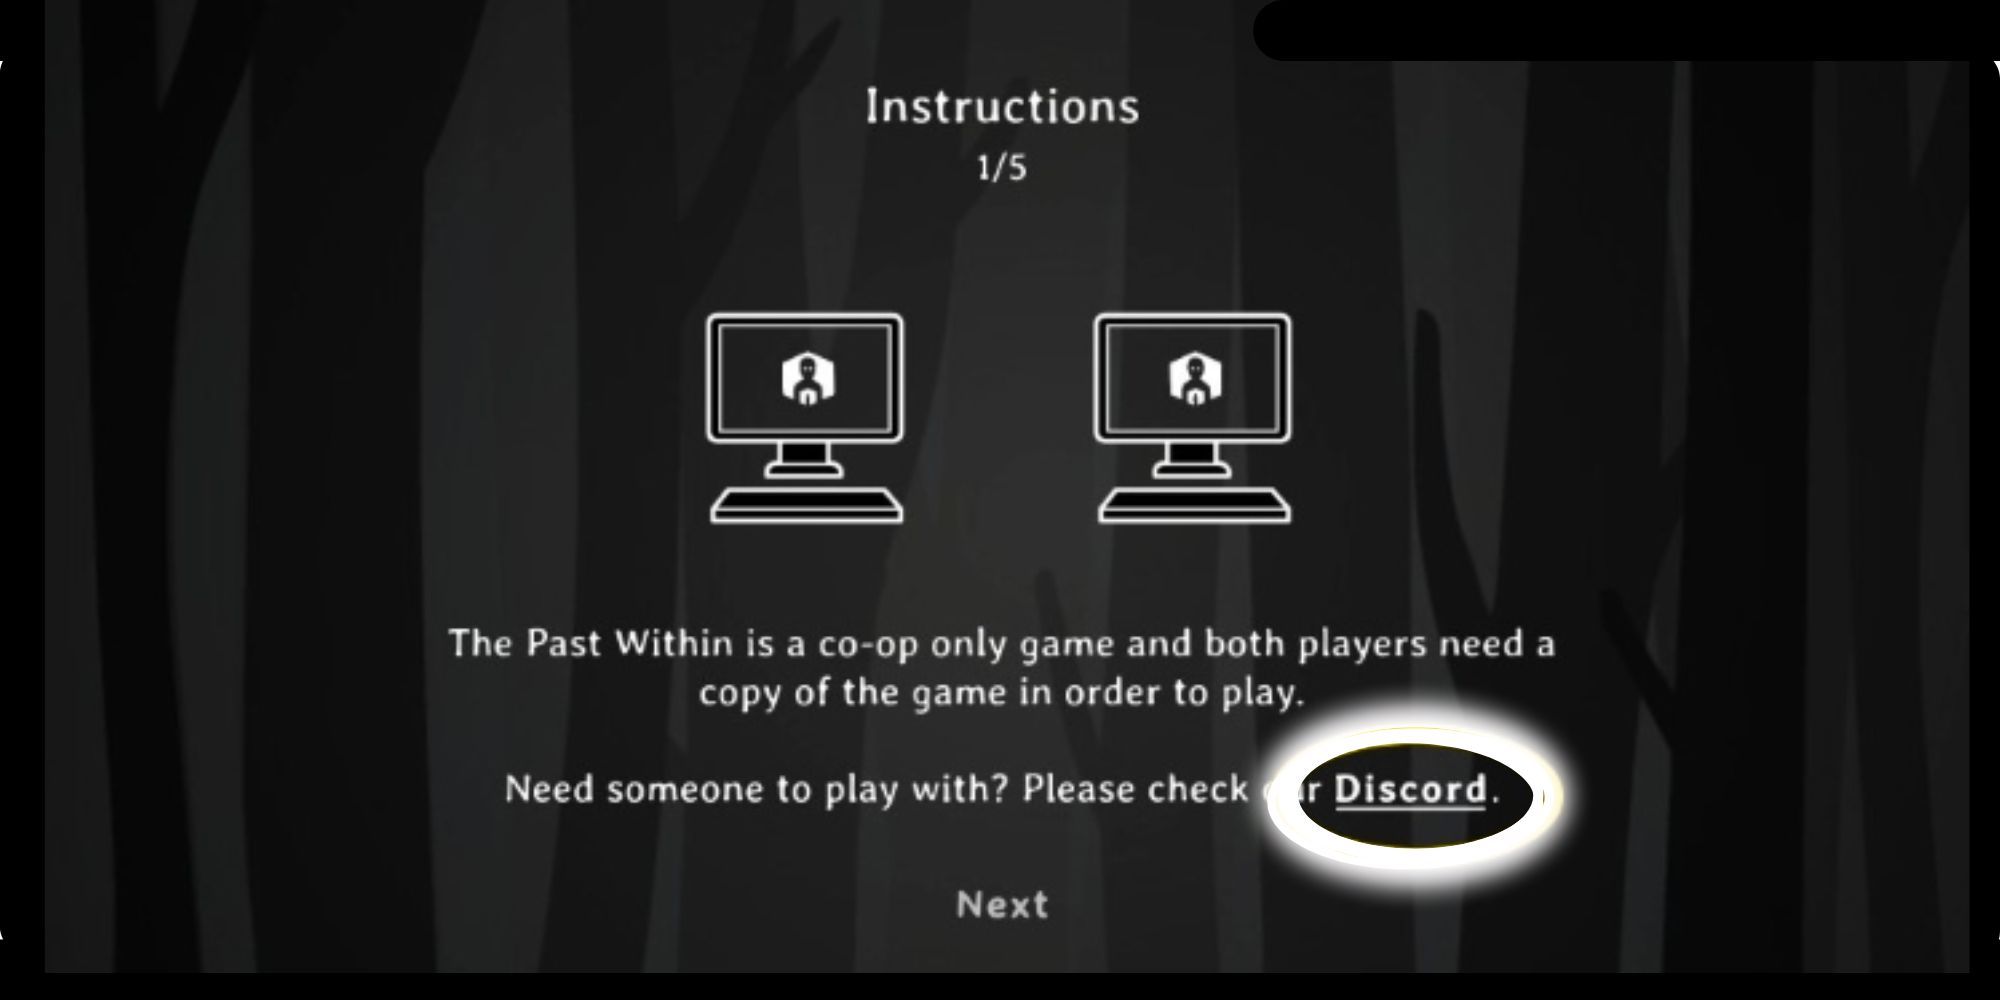 The Past Within Instruction Screen and Discord Link